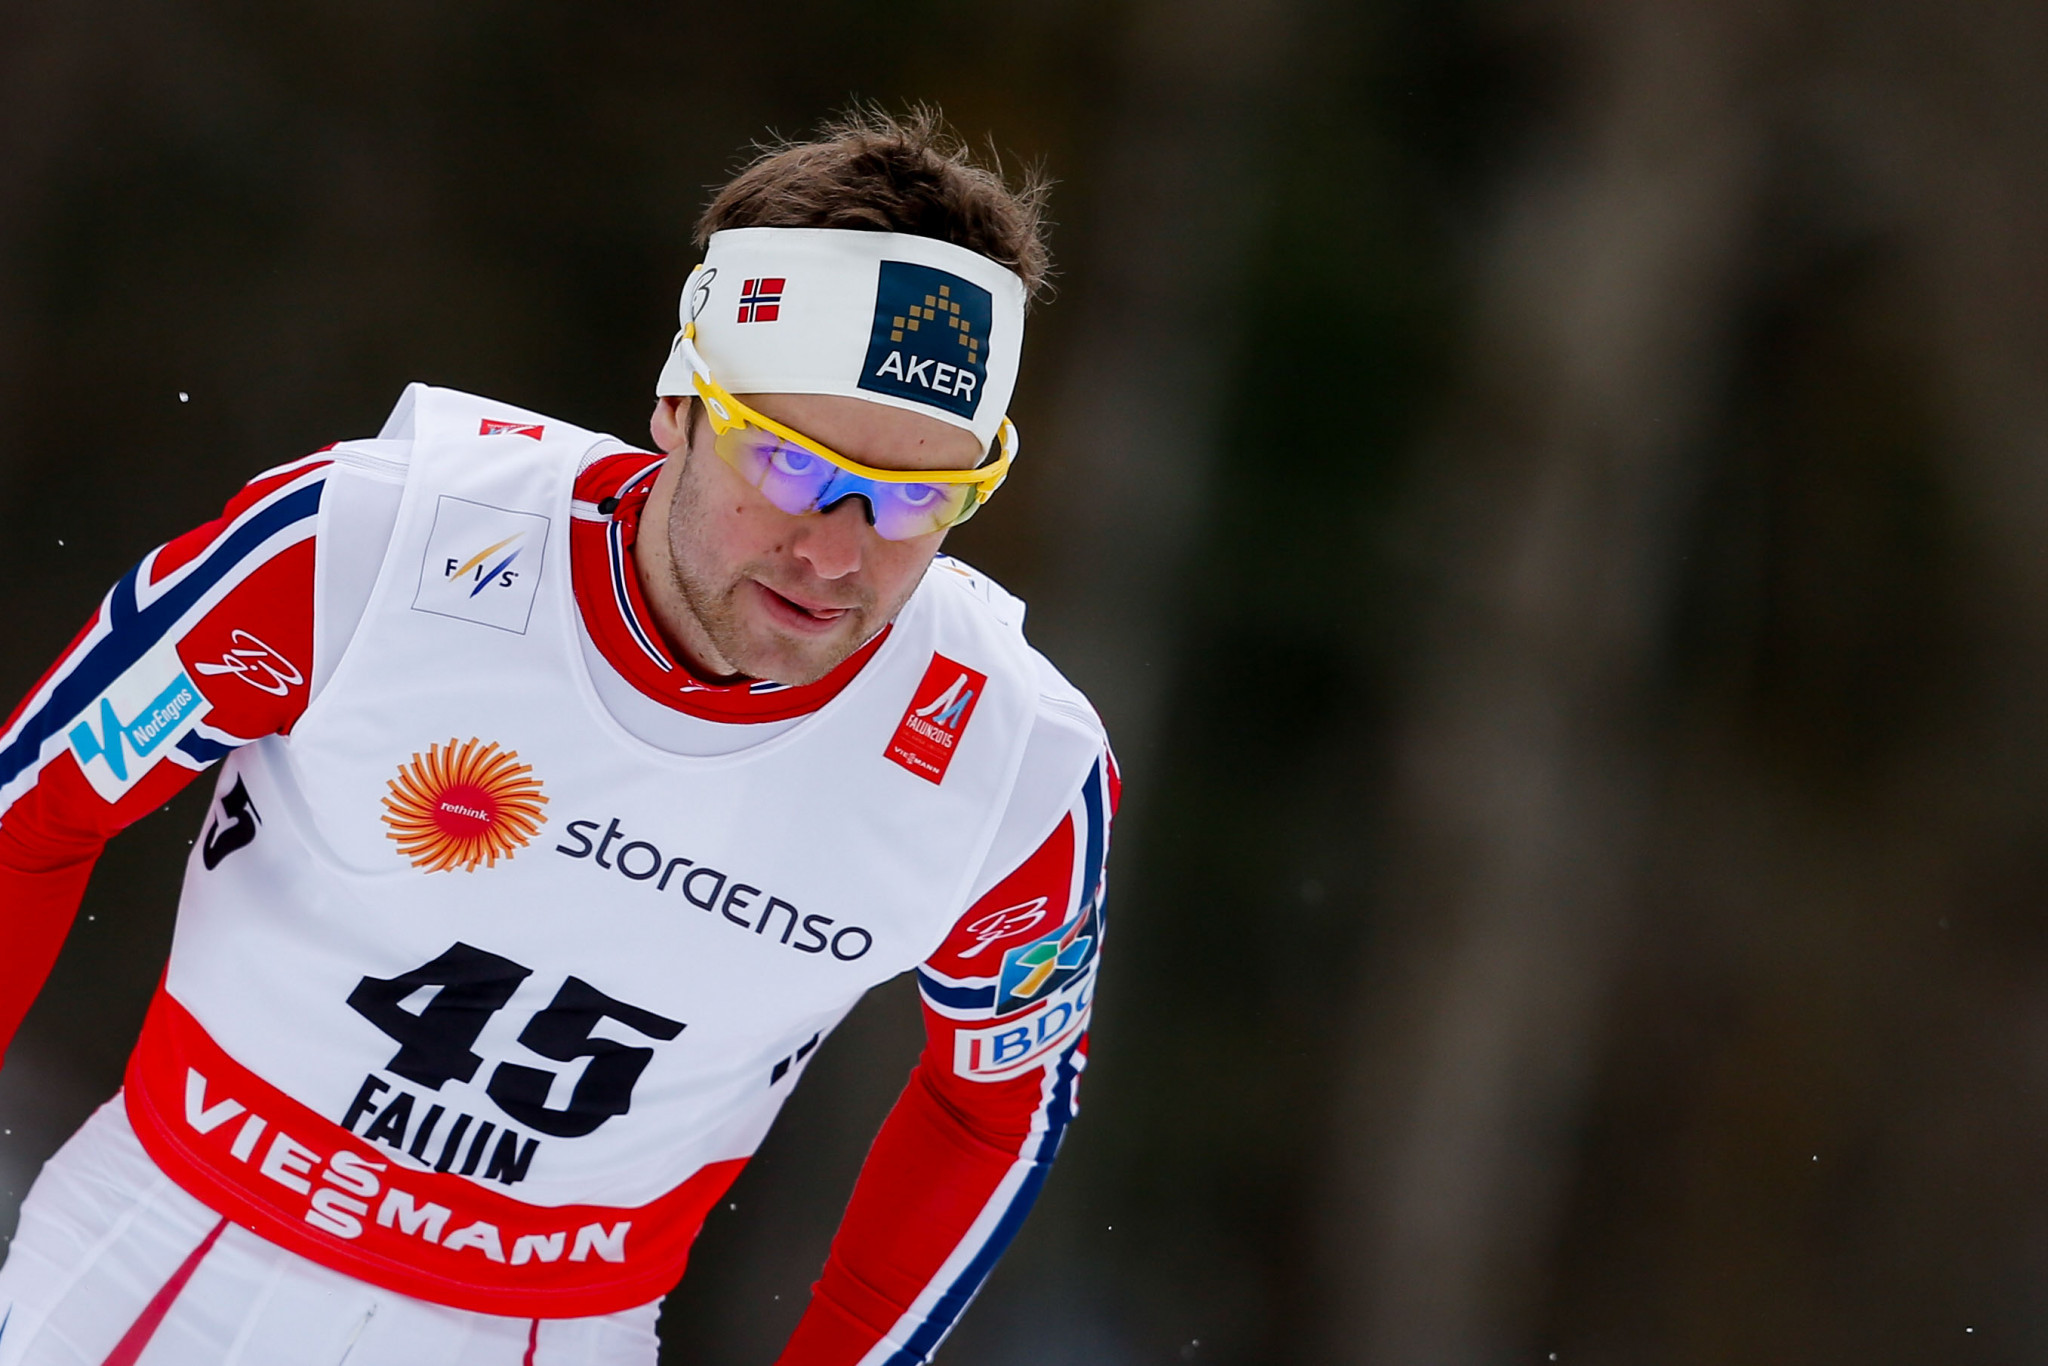 Sjur Roethe of Norway got his second World Cup win of the season after triumphing in Beitostølen ©Getty Images